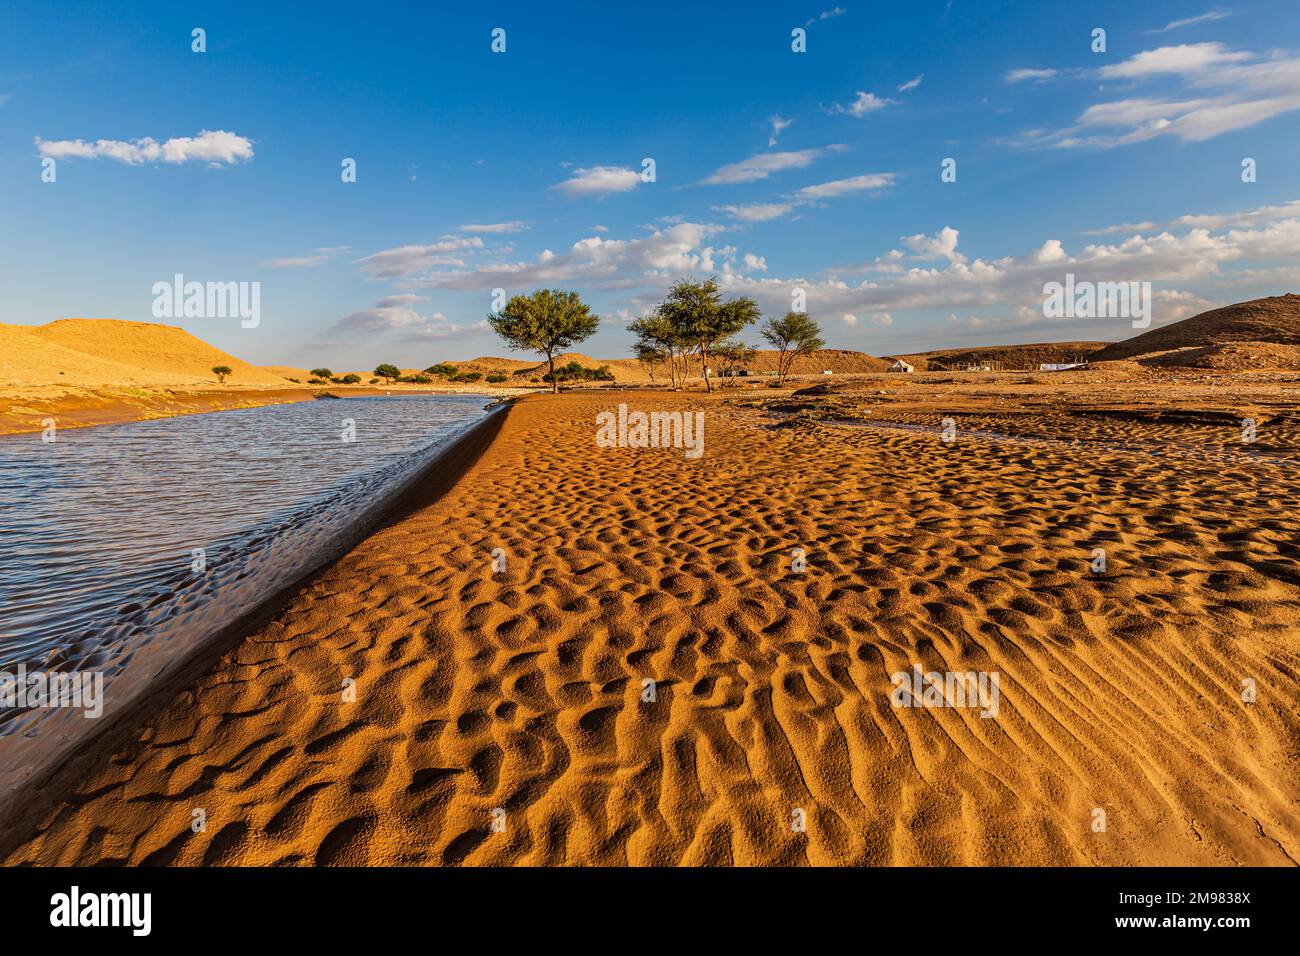 Desert landscape and lake after rain with tents in distance, Saudi Arabia Stock Photo